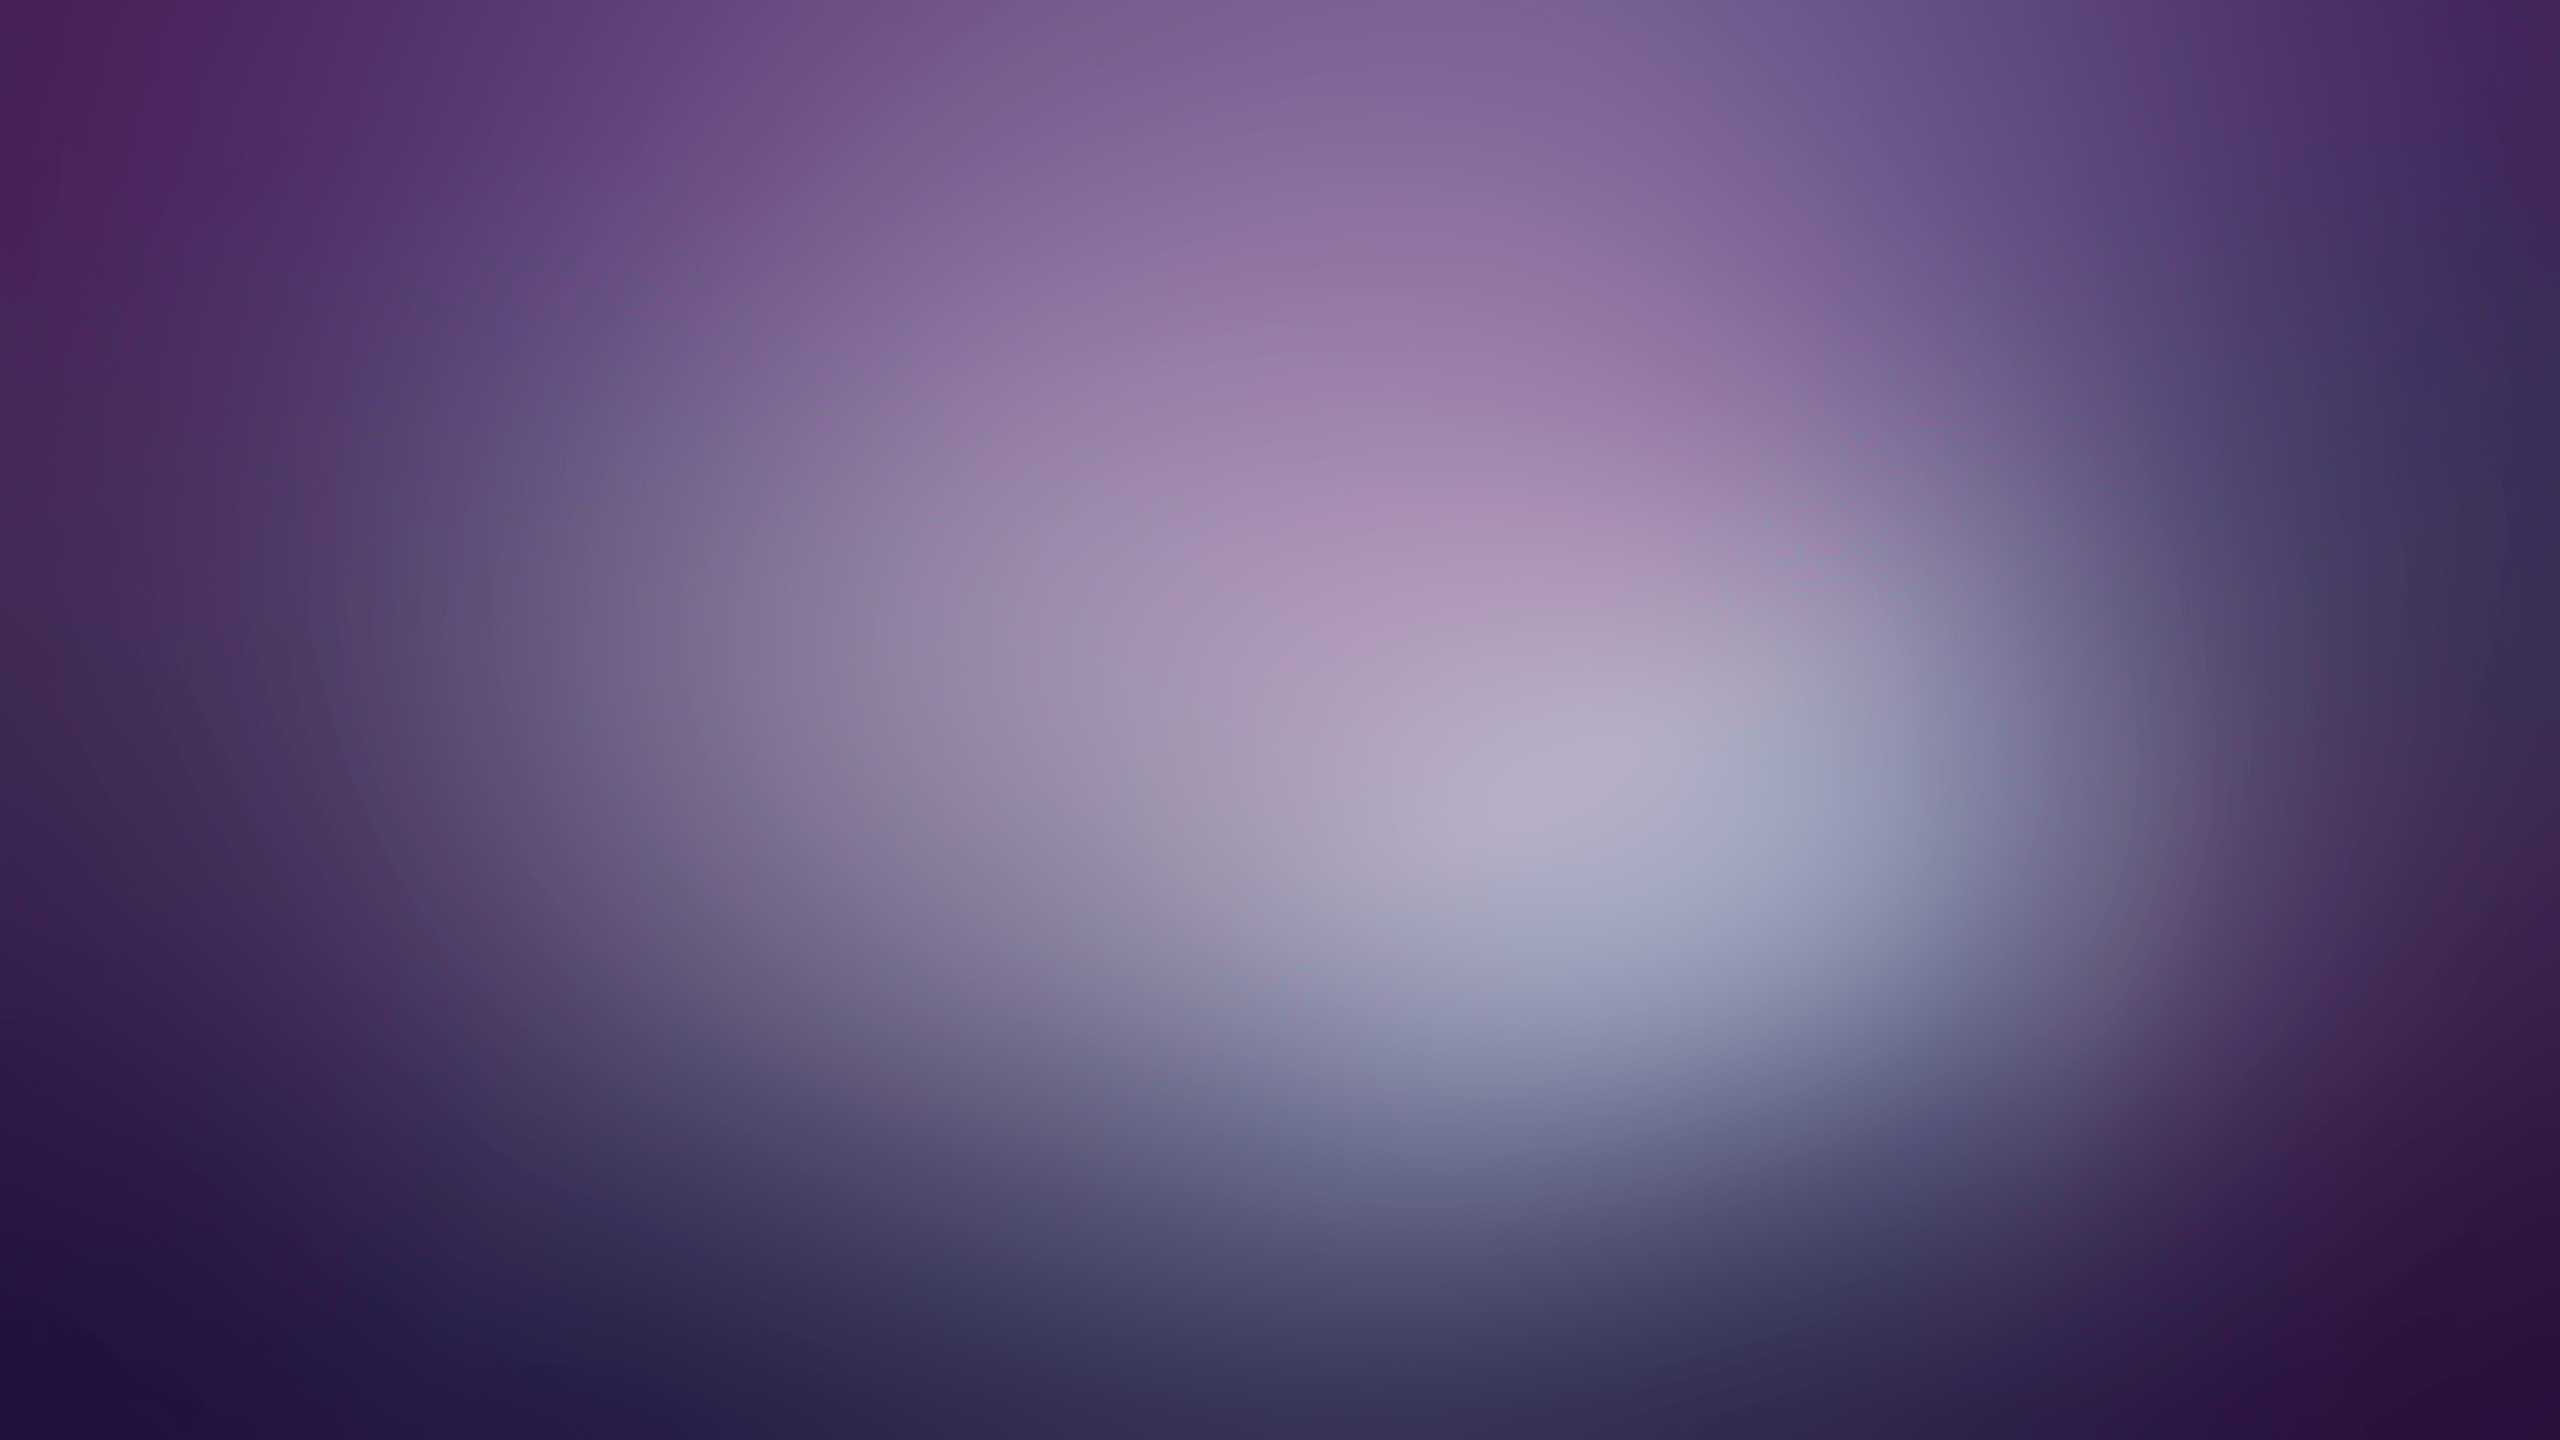 Solid Dark Purple Backgrounds Backgrounds 1 HD Wallpapers